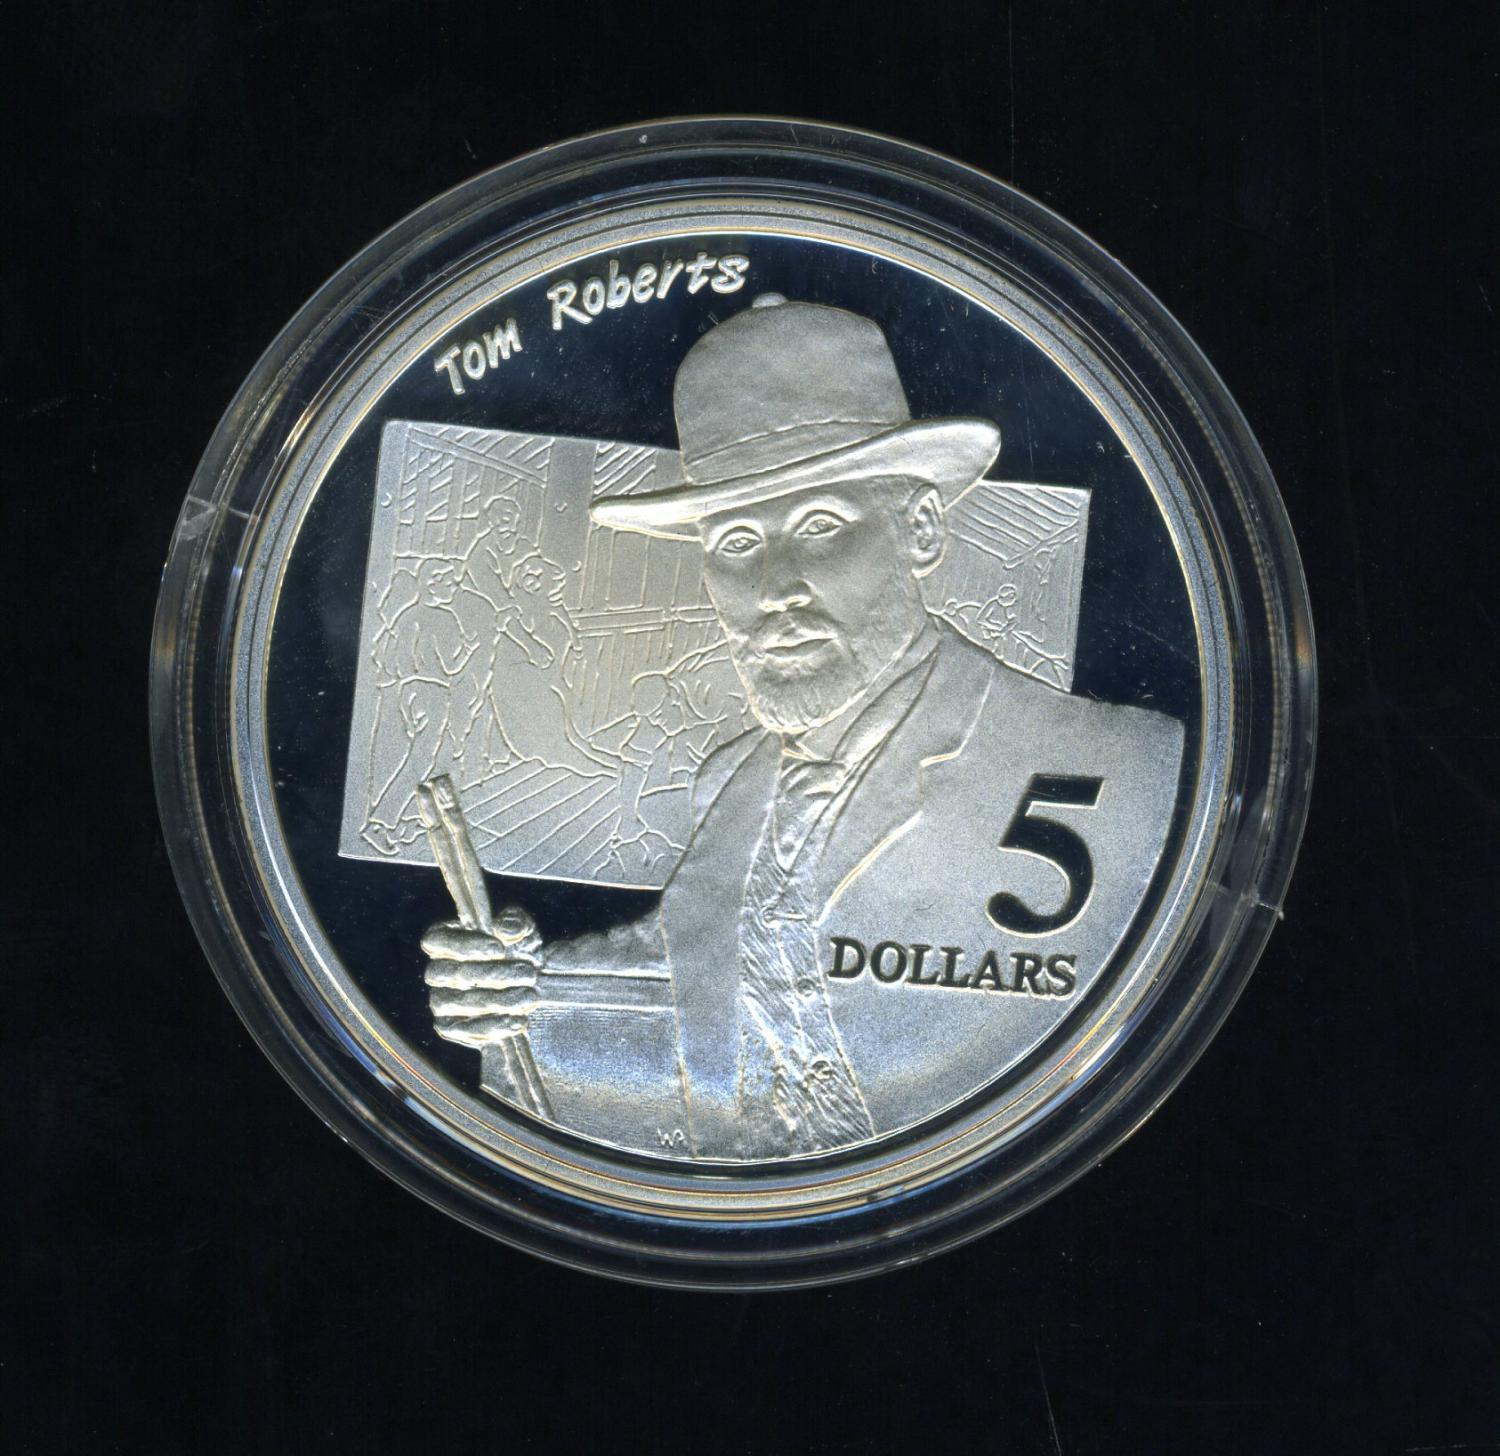 Thumbnail for 1996 Australian $5 Silver Coin From Masterpieces Set - Tom Roberts.  The Coin is Sterling Silver and contains over 1oz of Pure Silver.